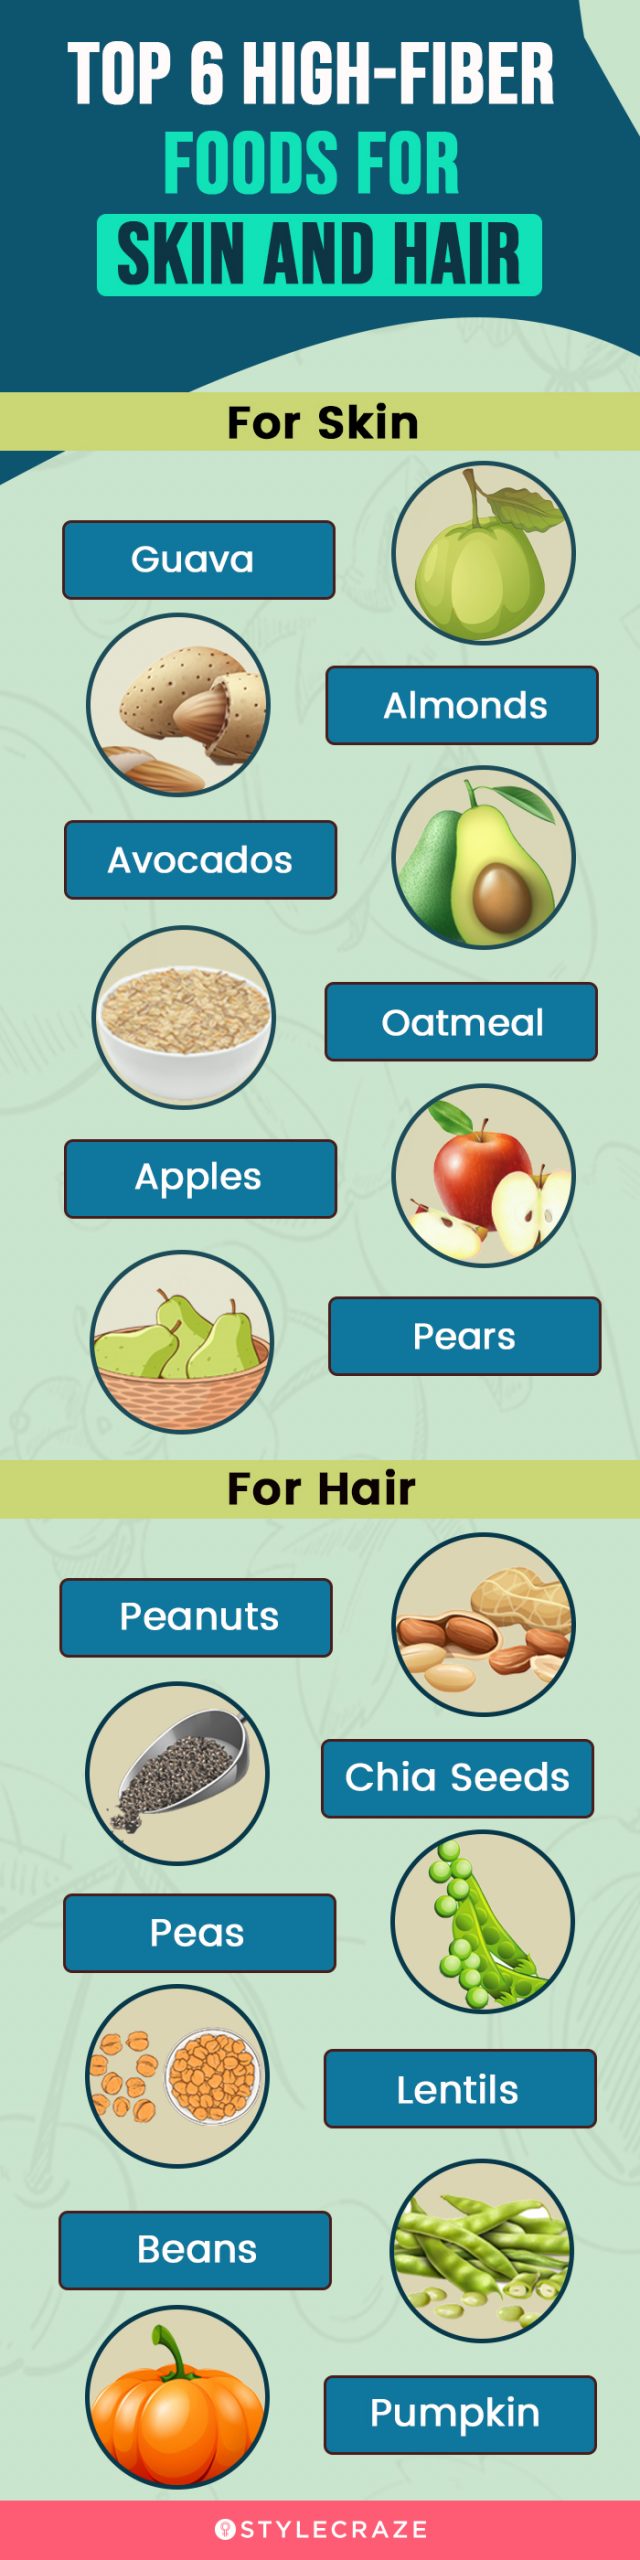 top 6 high fiber foods for skin and hair [infographic]